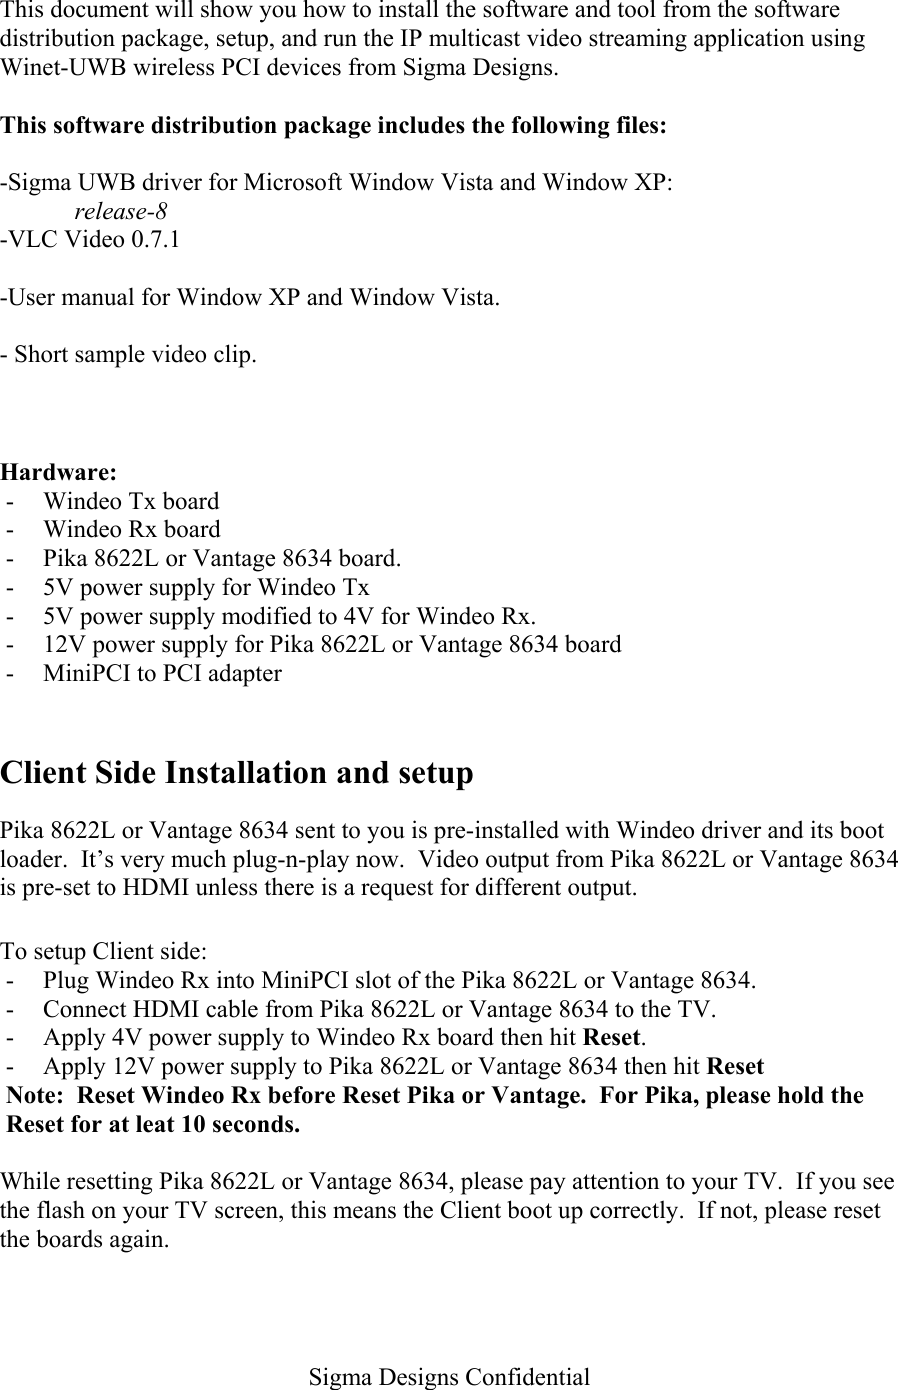   Sigma Designs Confidential  This document will show you how to install the software and tool from the software distribution package, setup, and run the IP multicast video streaming application using Winet-UWB wireless PCI devices from Sigma Designs.  This software distribution package includes the following files:  -Sigma UWB driver for Microsoft Window Vista and Window XP: release-8 -VLC Video 0.7.1  -User manual for Window XP and Window Vista.  - Short sample video clip.   Hardware: -  Windeo Tx board -  Windeo Rx board -  Pika 8622L or Vantage 8634 board. -  5V power supply for Windeo Tx -  5V power supply modified to 4V for Windeo Rx. -  12V power supply for Pika 8622L or Vantage 8634 board -  MiniPCI to PCI adapter  Client Side Installation and setup Pika 8622L or Vantage 8634 sent to you is pre-installed with Windeo driver and its boot loader.  It’s very much plug-n-play now.  Video output from Pika 8622L or Vantage 8634 is pre-set to HDMI unless there is a request for different output.  To setup Client side: -  Plug Windeo Rx into MiniPCI slot of the Pika 8622L or Vantage 8634. -  Connect HDMI cable from Pika 8622L or Vantage 8634 to the TV. -  Apply 4V power supply to Windeo Rx board then hit Reset.   -  Apply 12V power supply to Pika 8622L or Vantage 8634 then hit Reset Note:  Reset Windeo Rx before Reset Pika or Vantage.  For Pika, please hold the Reset for at leat 10 seconds.  While resetting Pika 8622L or Vantage 8634, please pay attention to your TV.  If you see the flash on your TV screen, this means the Client boot up correctly.  If not, please reset the boards again.  